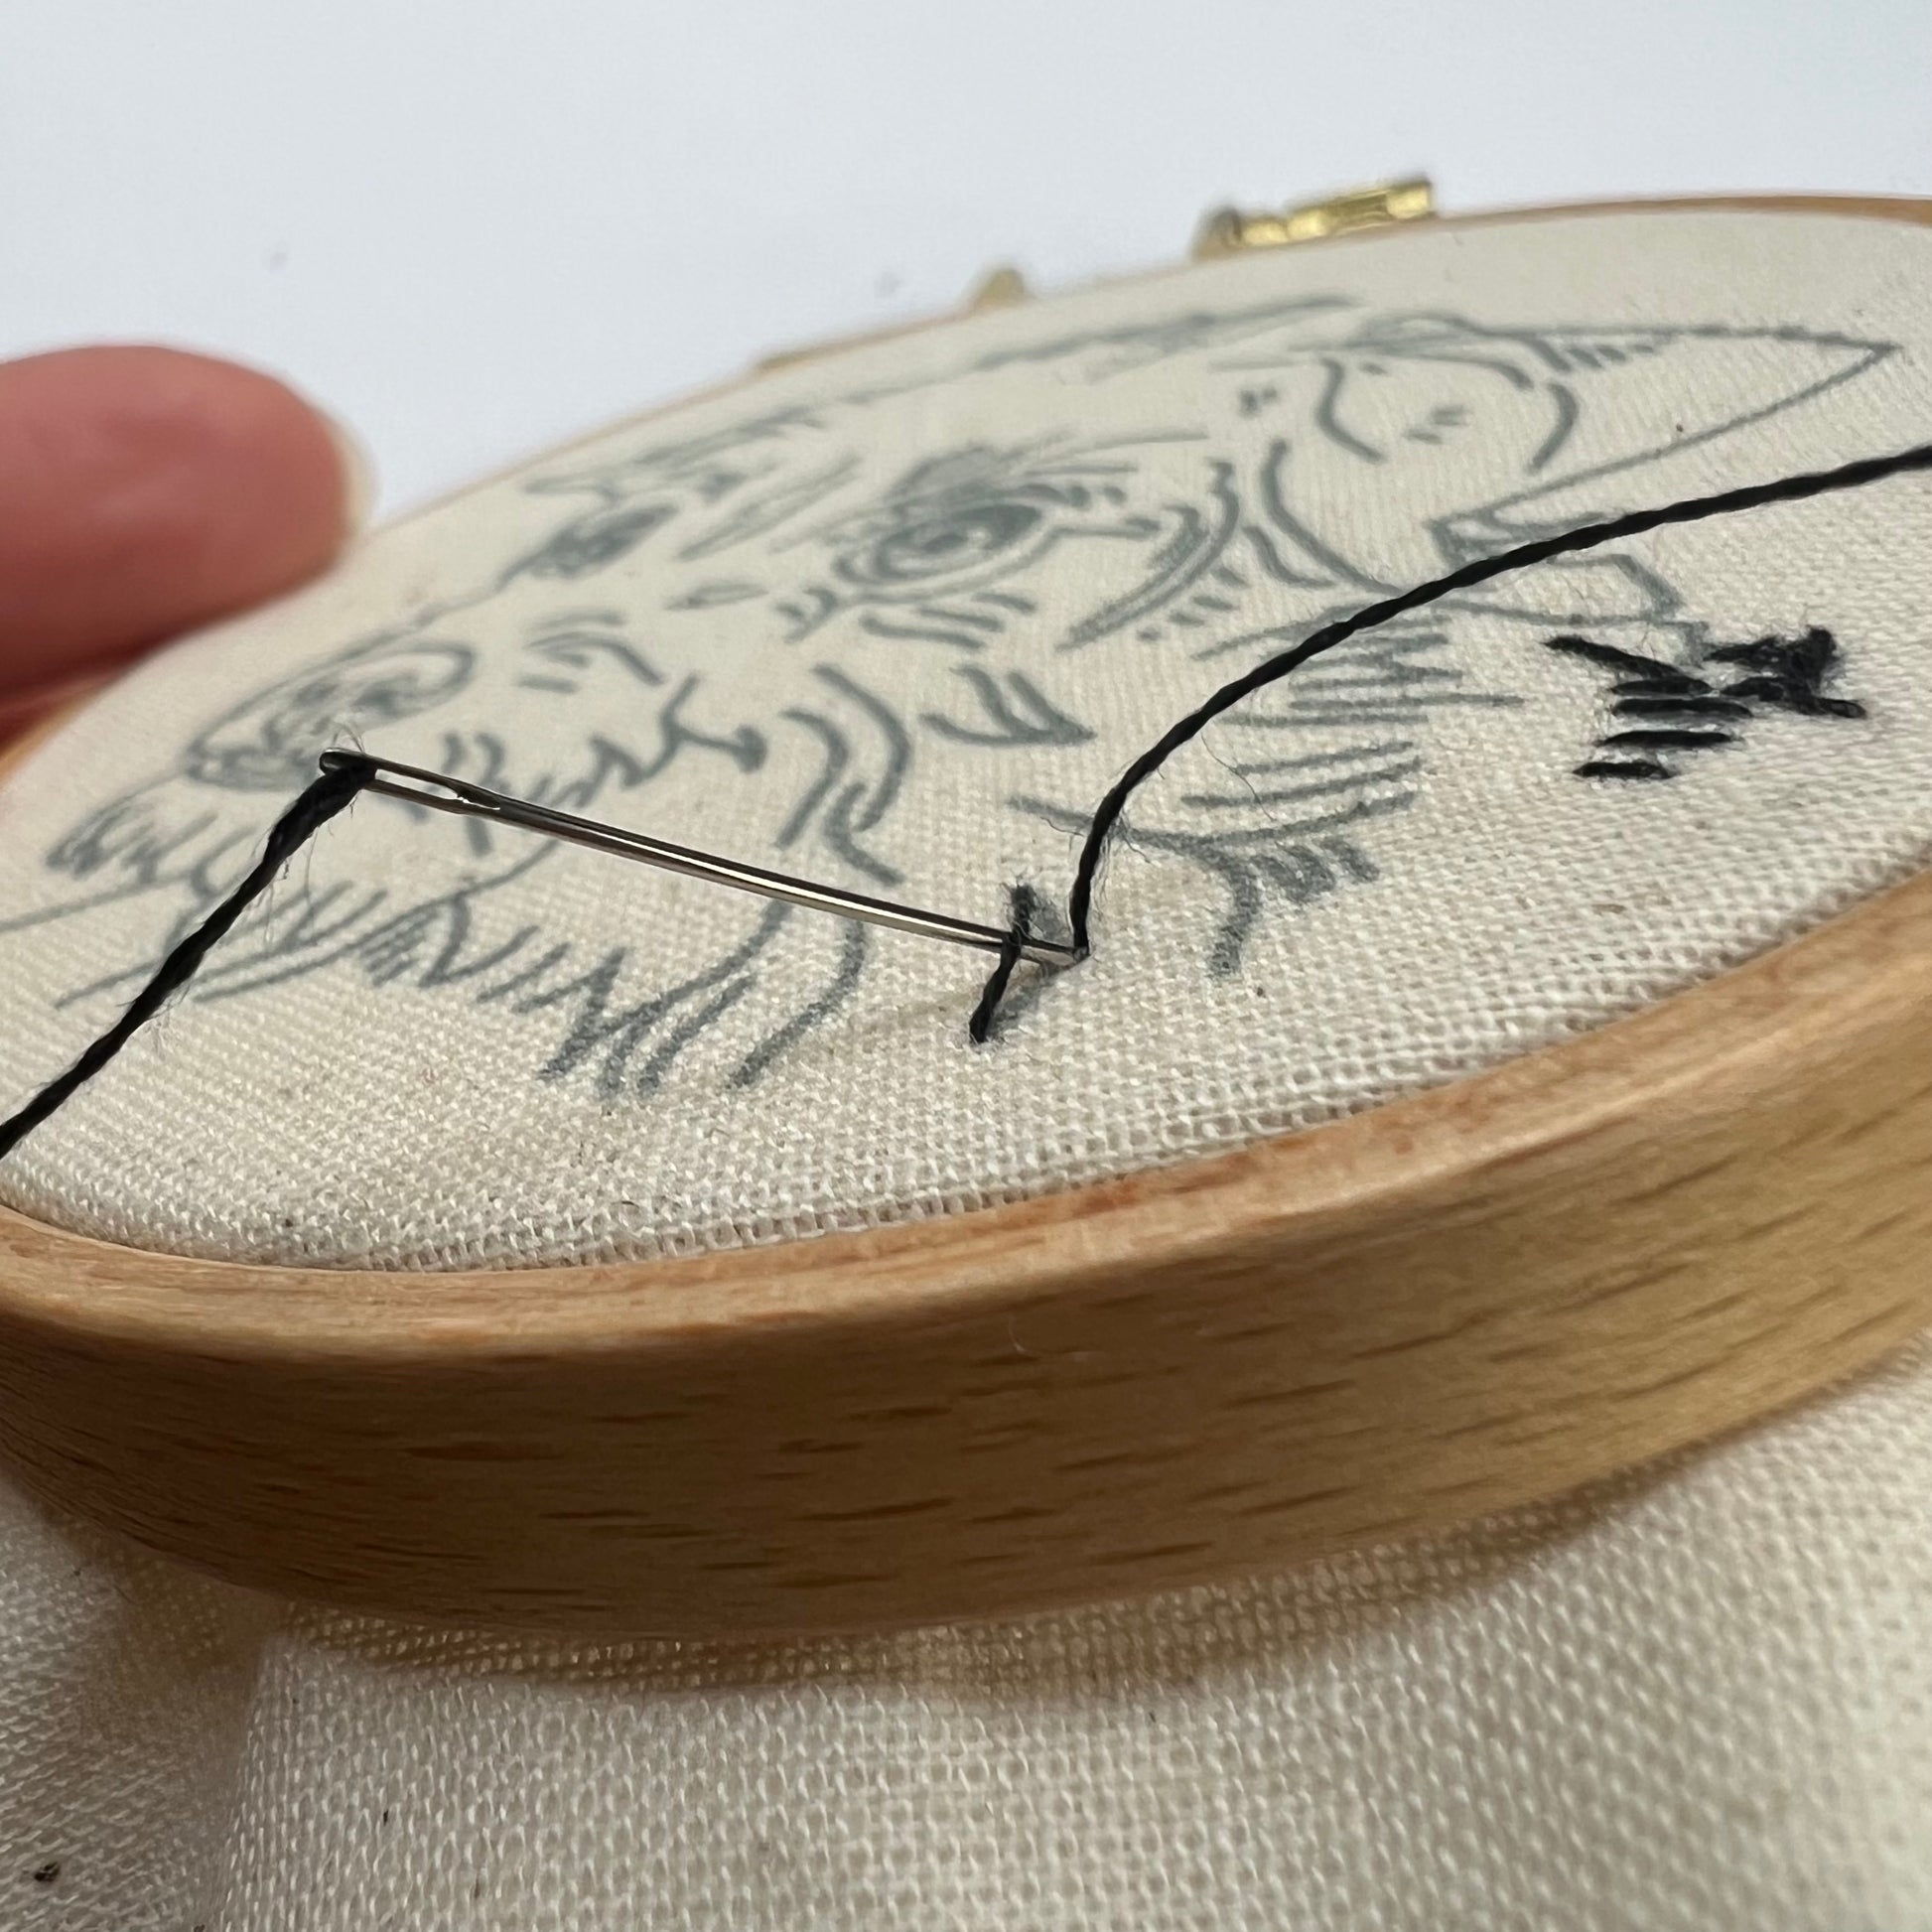 An up close image of an embroidered pet portrait work in progress with a needle and black thread going through off white fabric